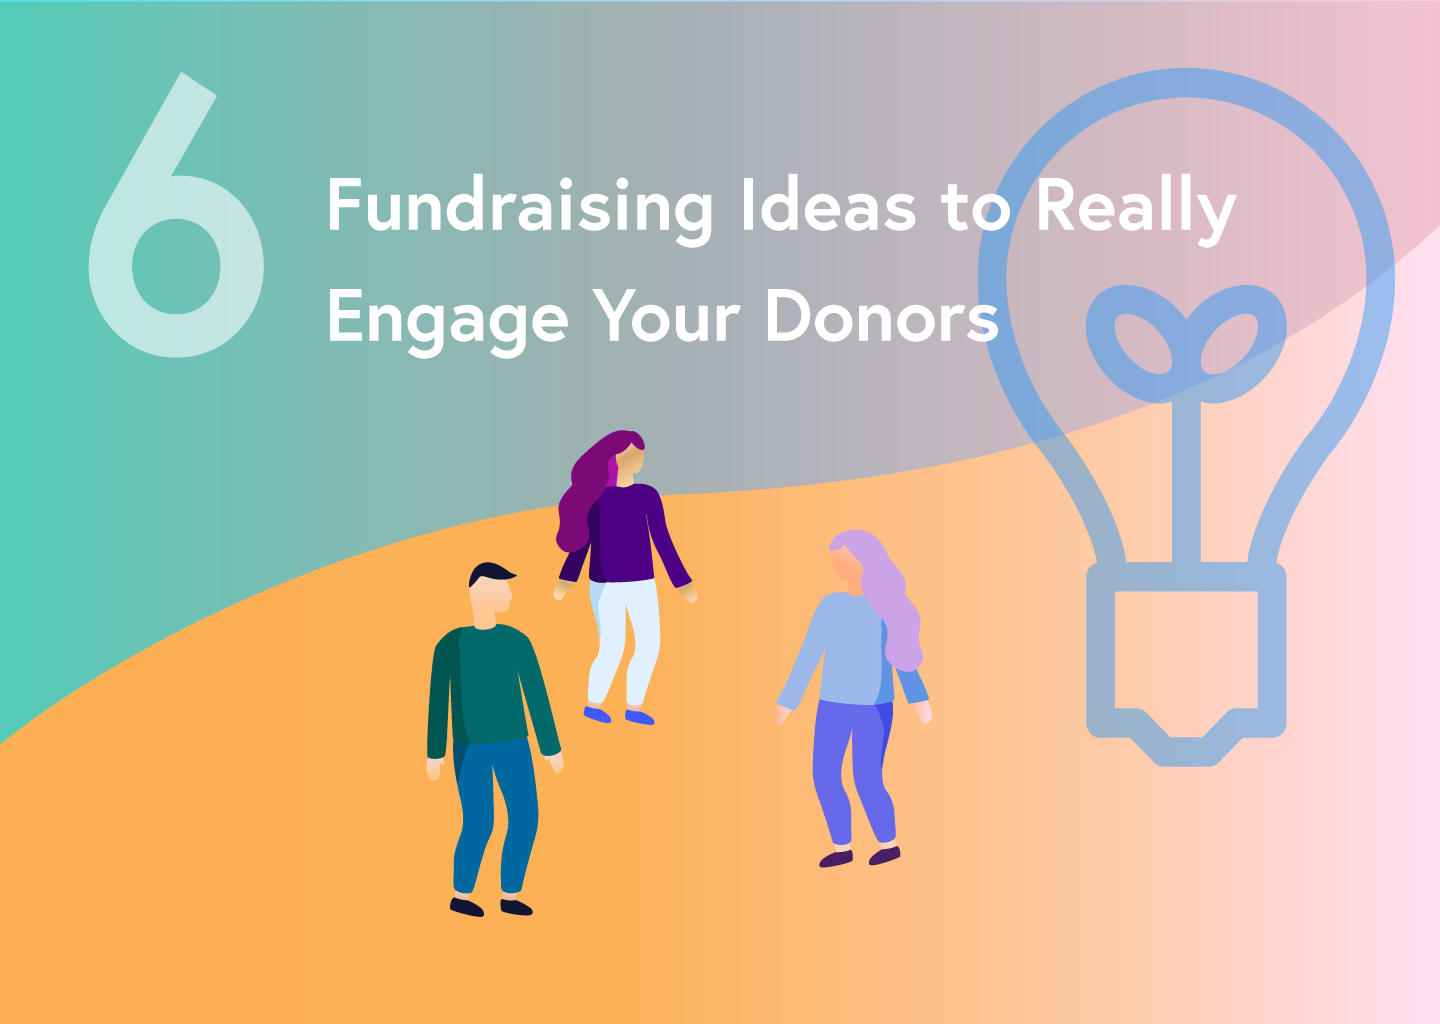 6 Group Fundraising Ideas to Really Engage Your Donors